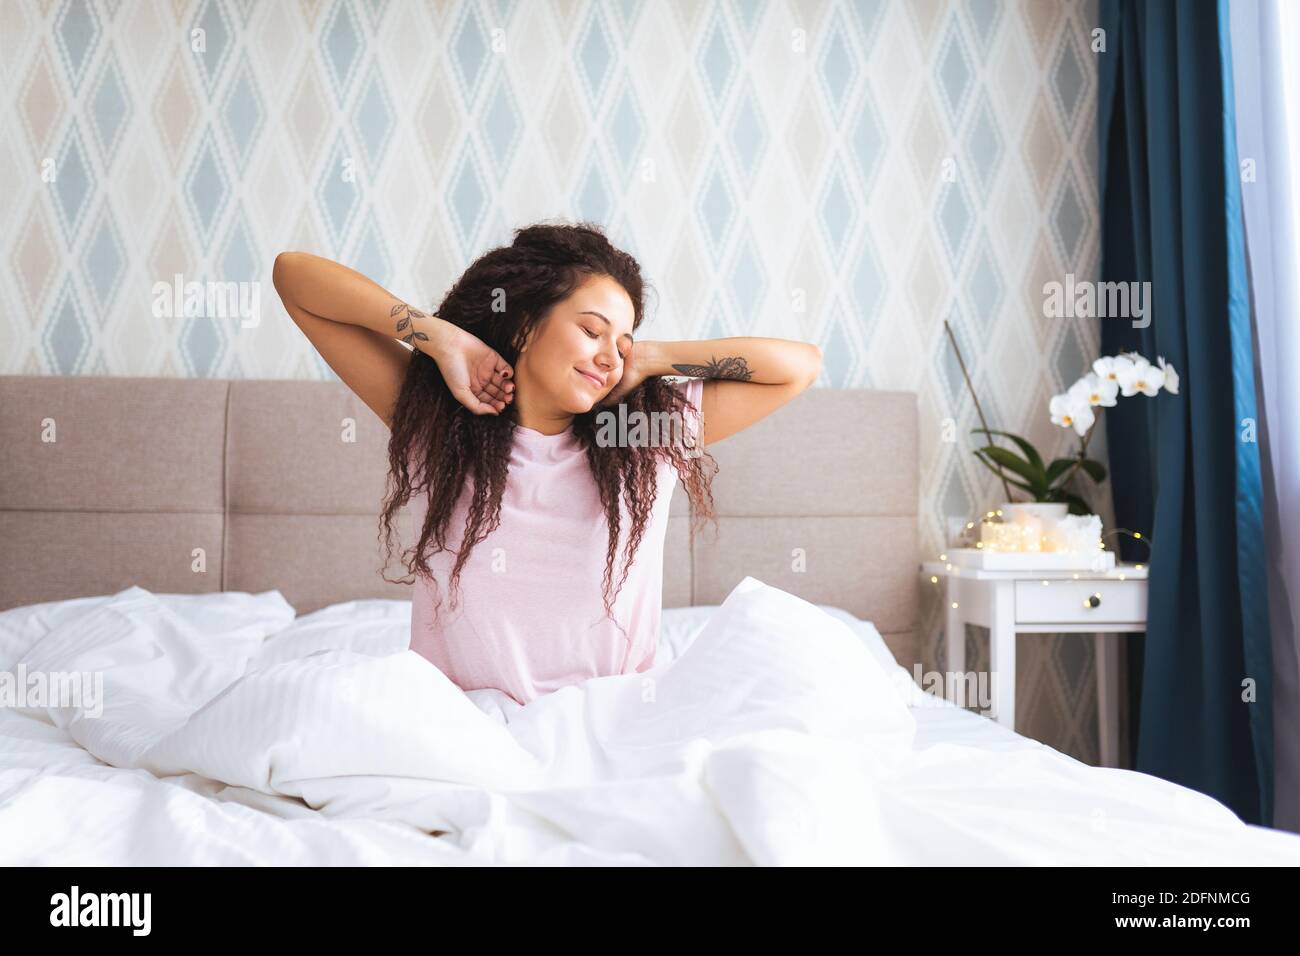 Font view of young woman waking up in early morning sitting on bed with whitesnow linen and sretch her arms and body with smile Stock Photo